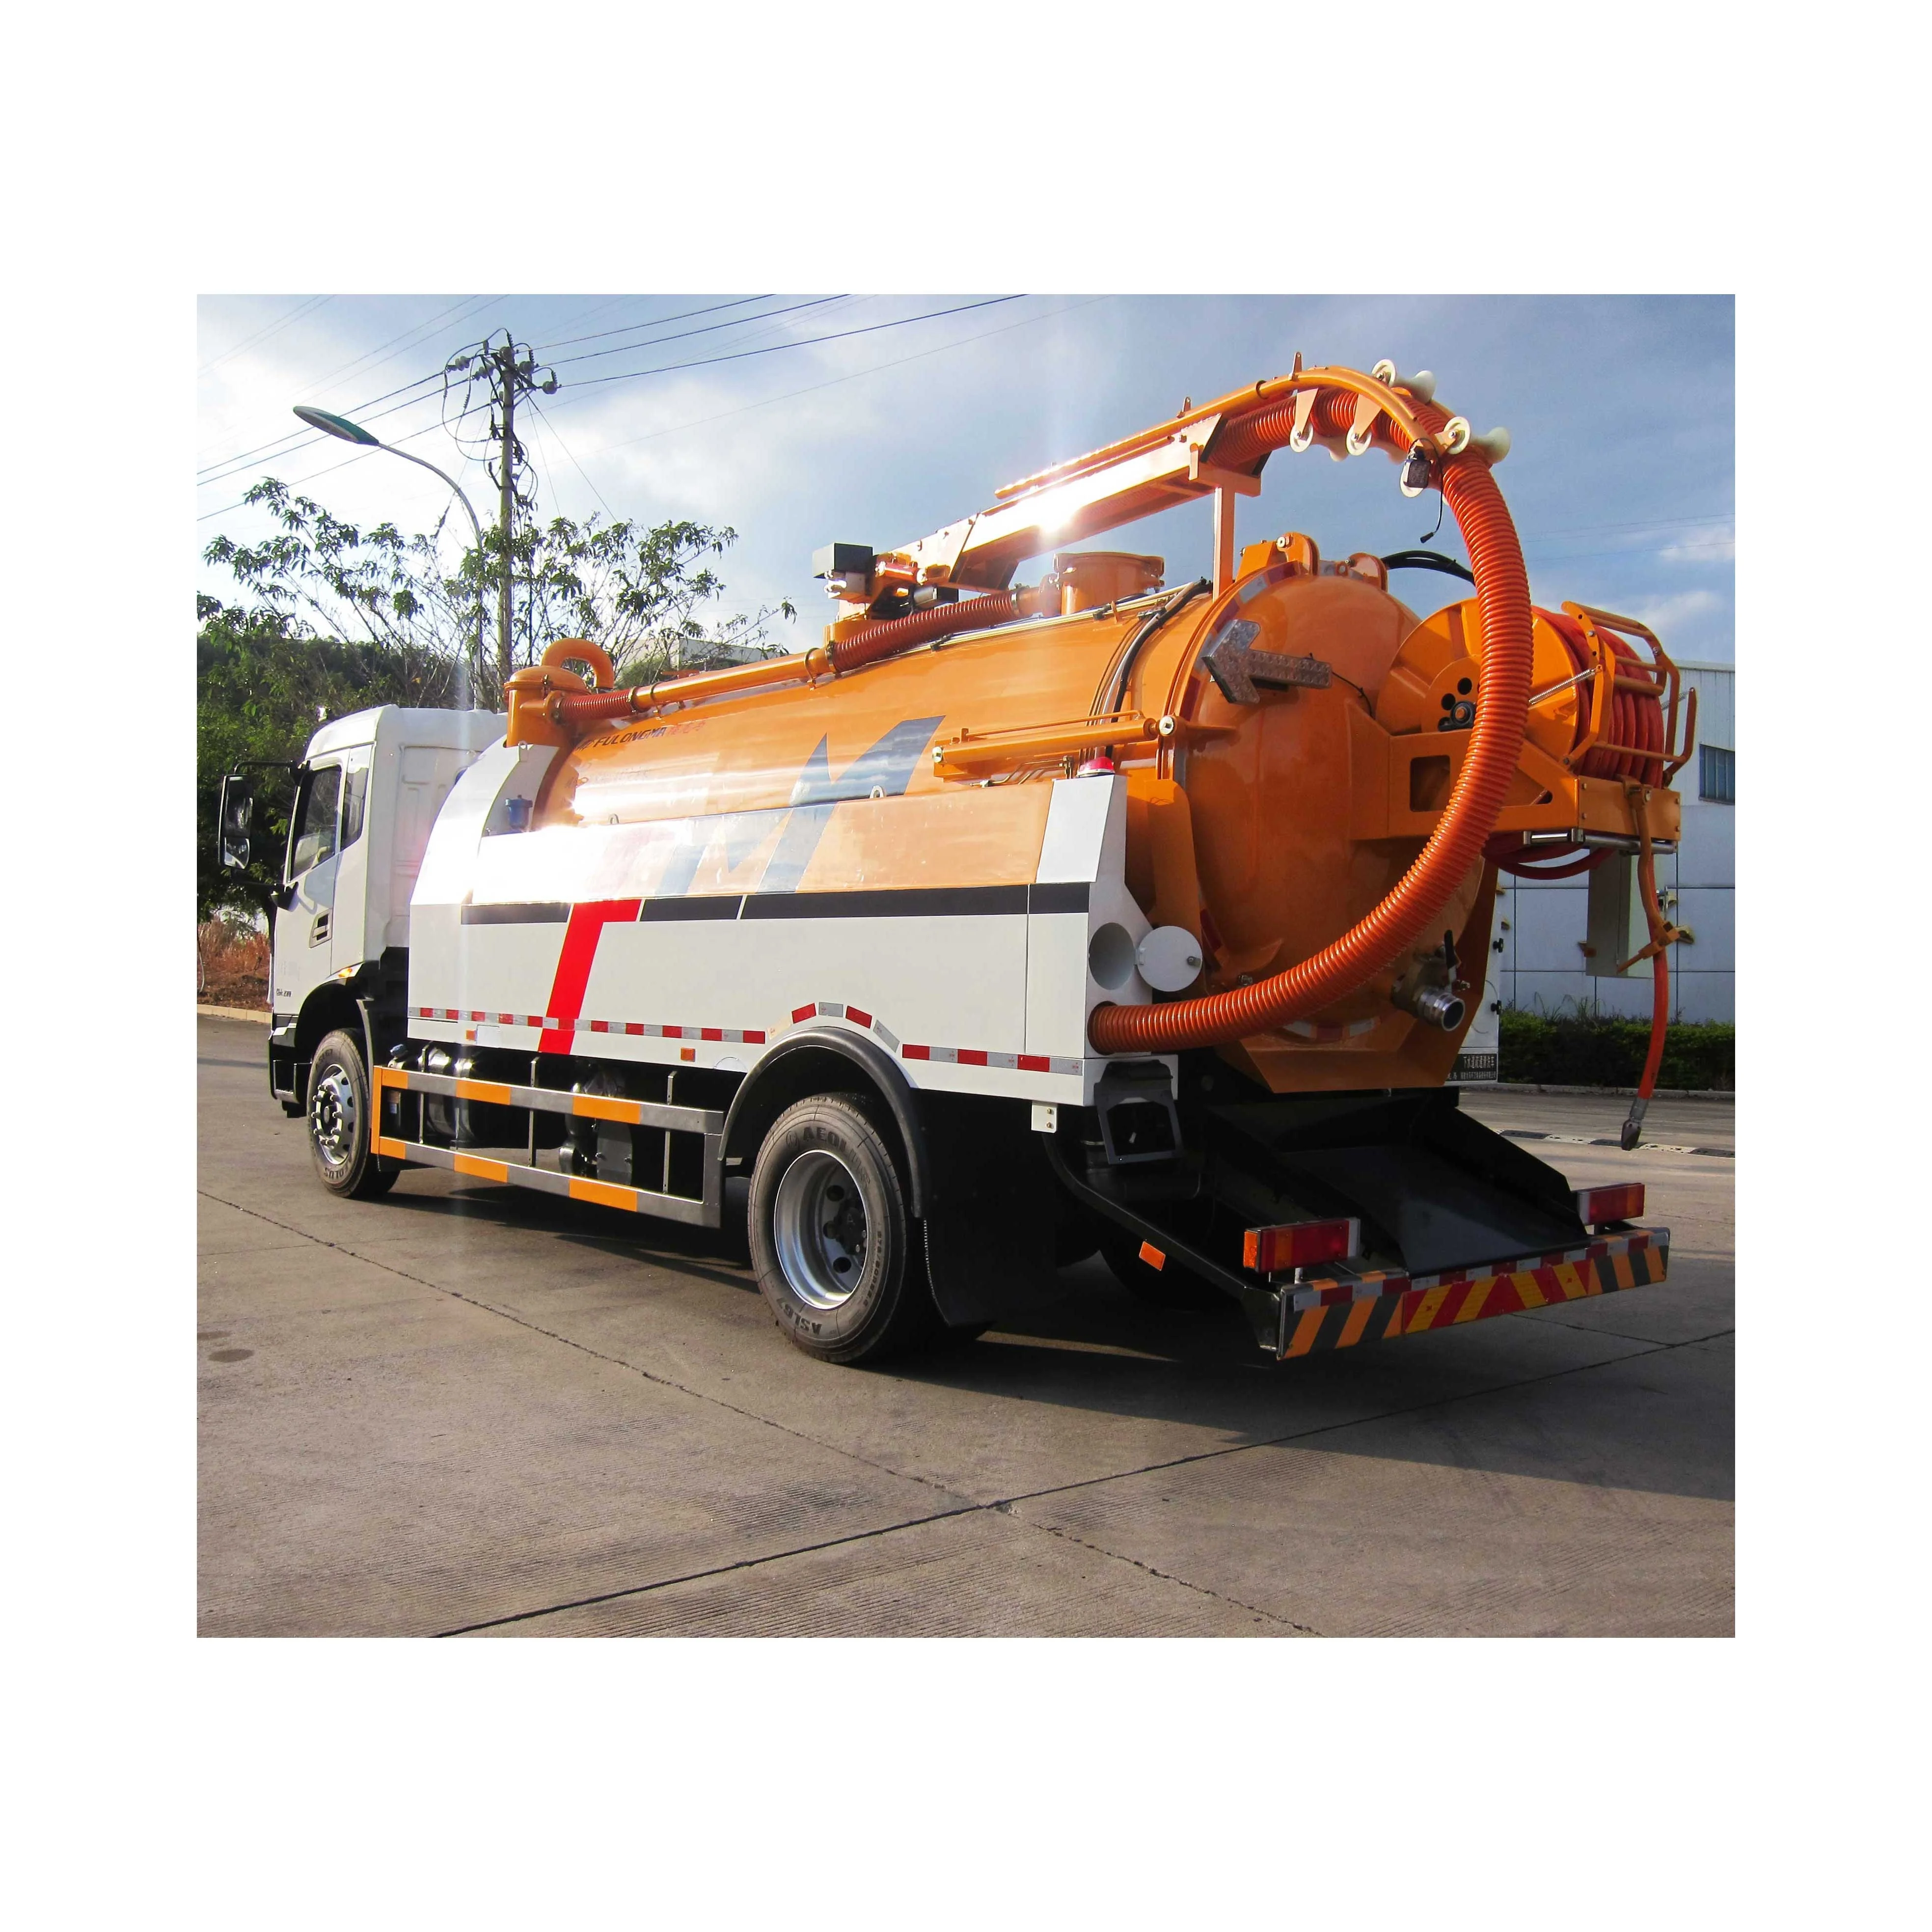 FULONGMA sewer cleaners hydro jetters dislodge debris sewage cleaning truck